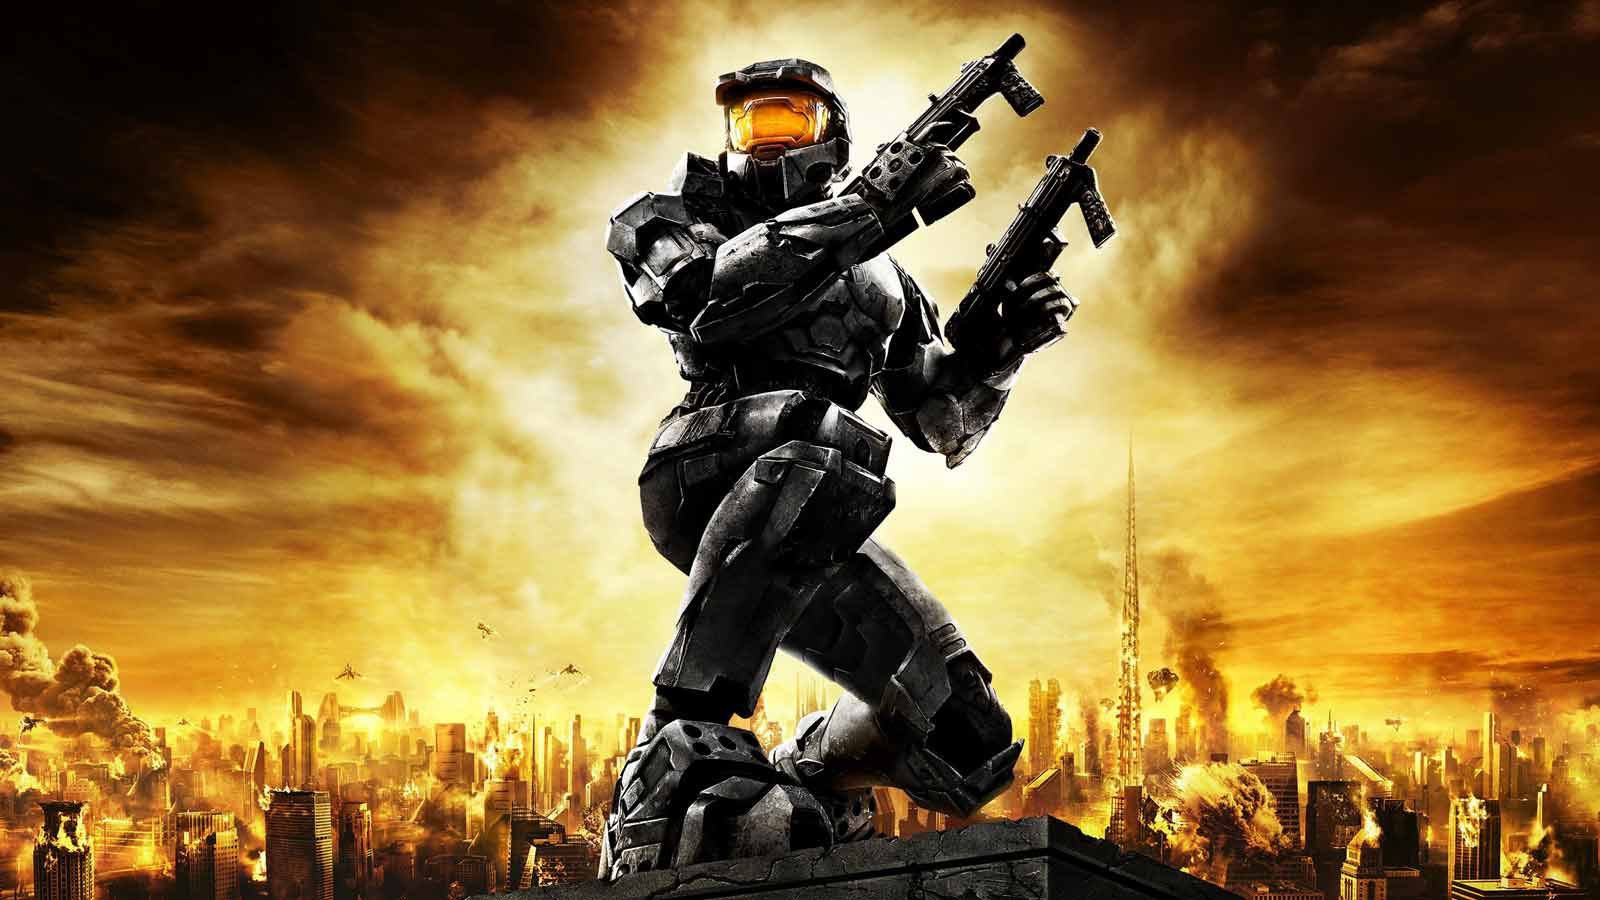 Promotional wallpaper for Halo 2, which was originally exclusive to the first-gen Xbox and Windows Vista